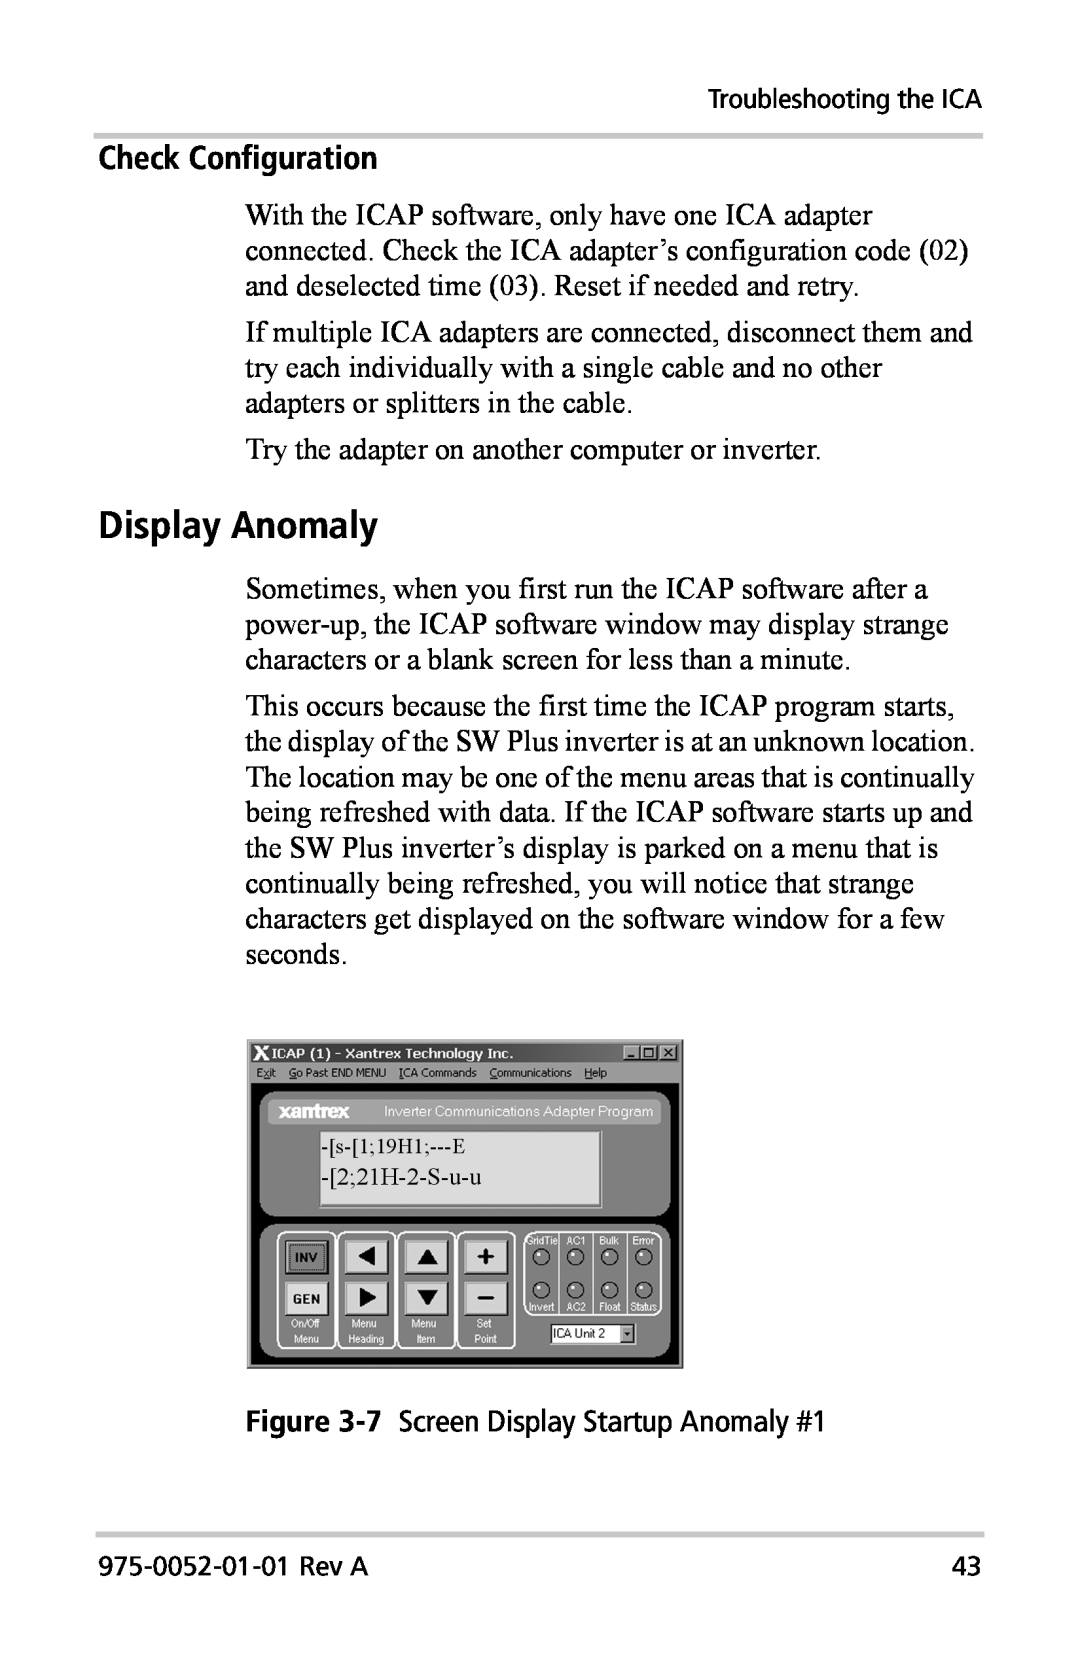 Xantrex Technology Inverter Communications Adapter manual Display Anomaly, Check Configuration 